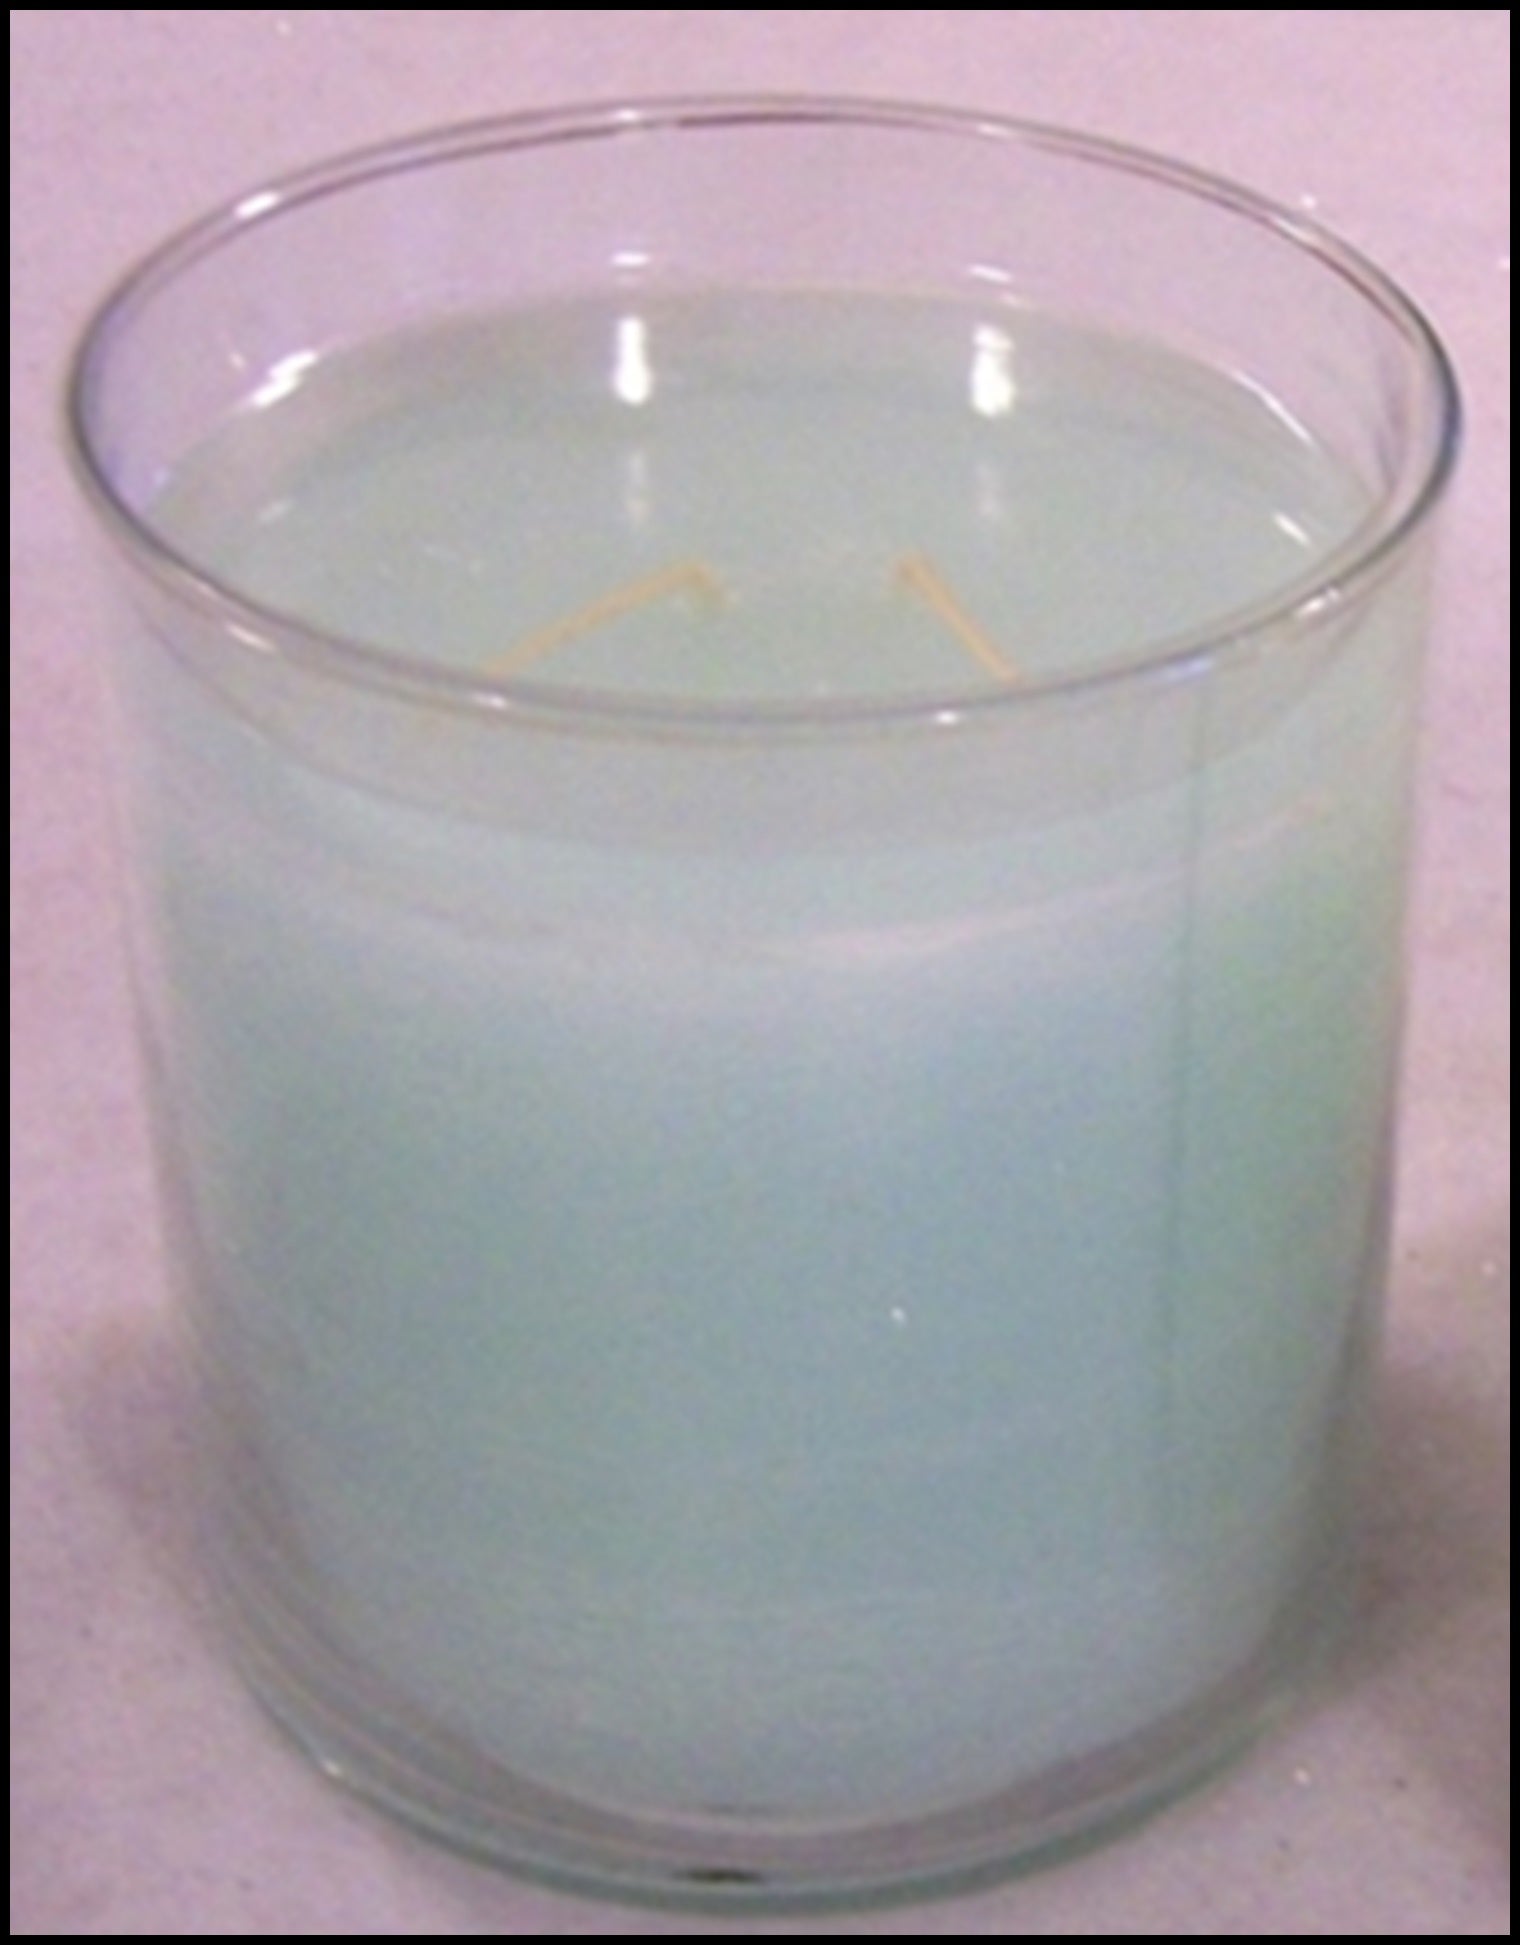 PartyLite GLOLITE GLOW LIGHT 2-Wick Round Glass Jar Boxed Candle TROPICAL WATERS - Plastic Glass and Wax